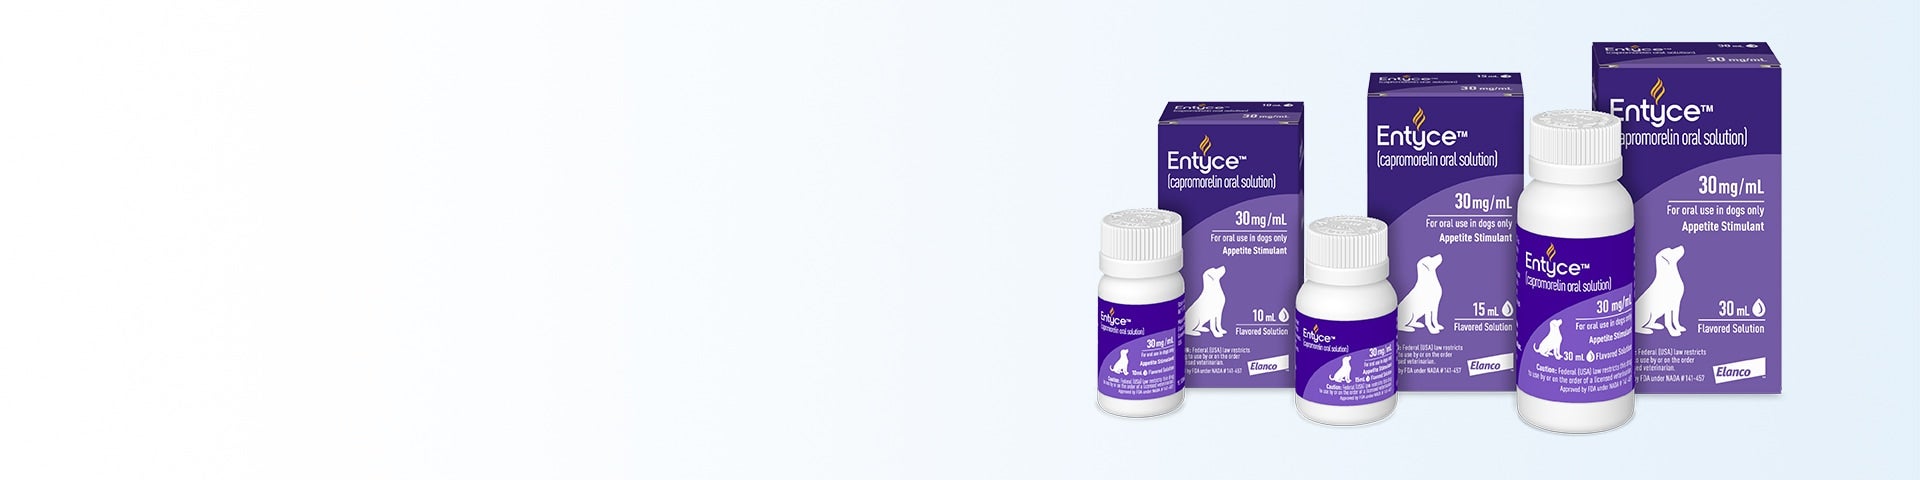 Entyce Product Package